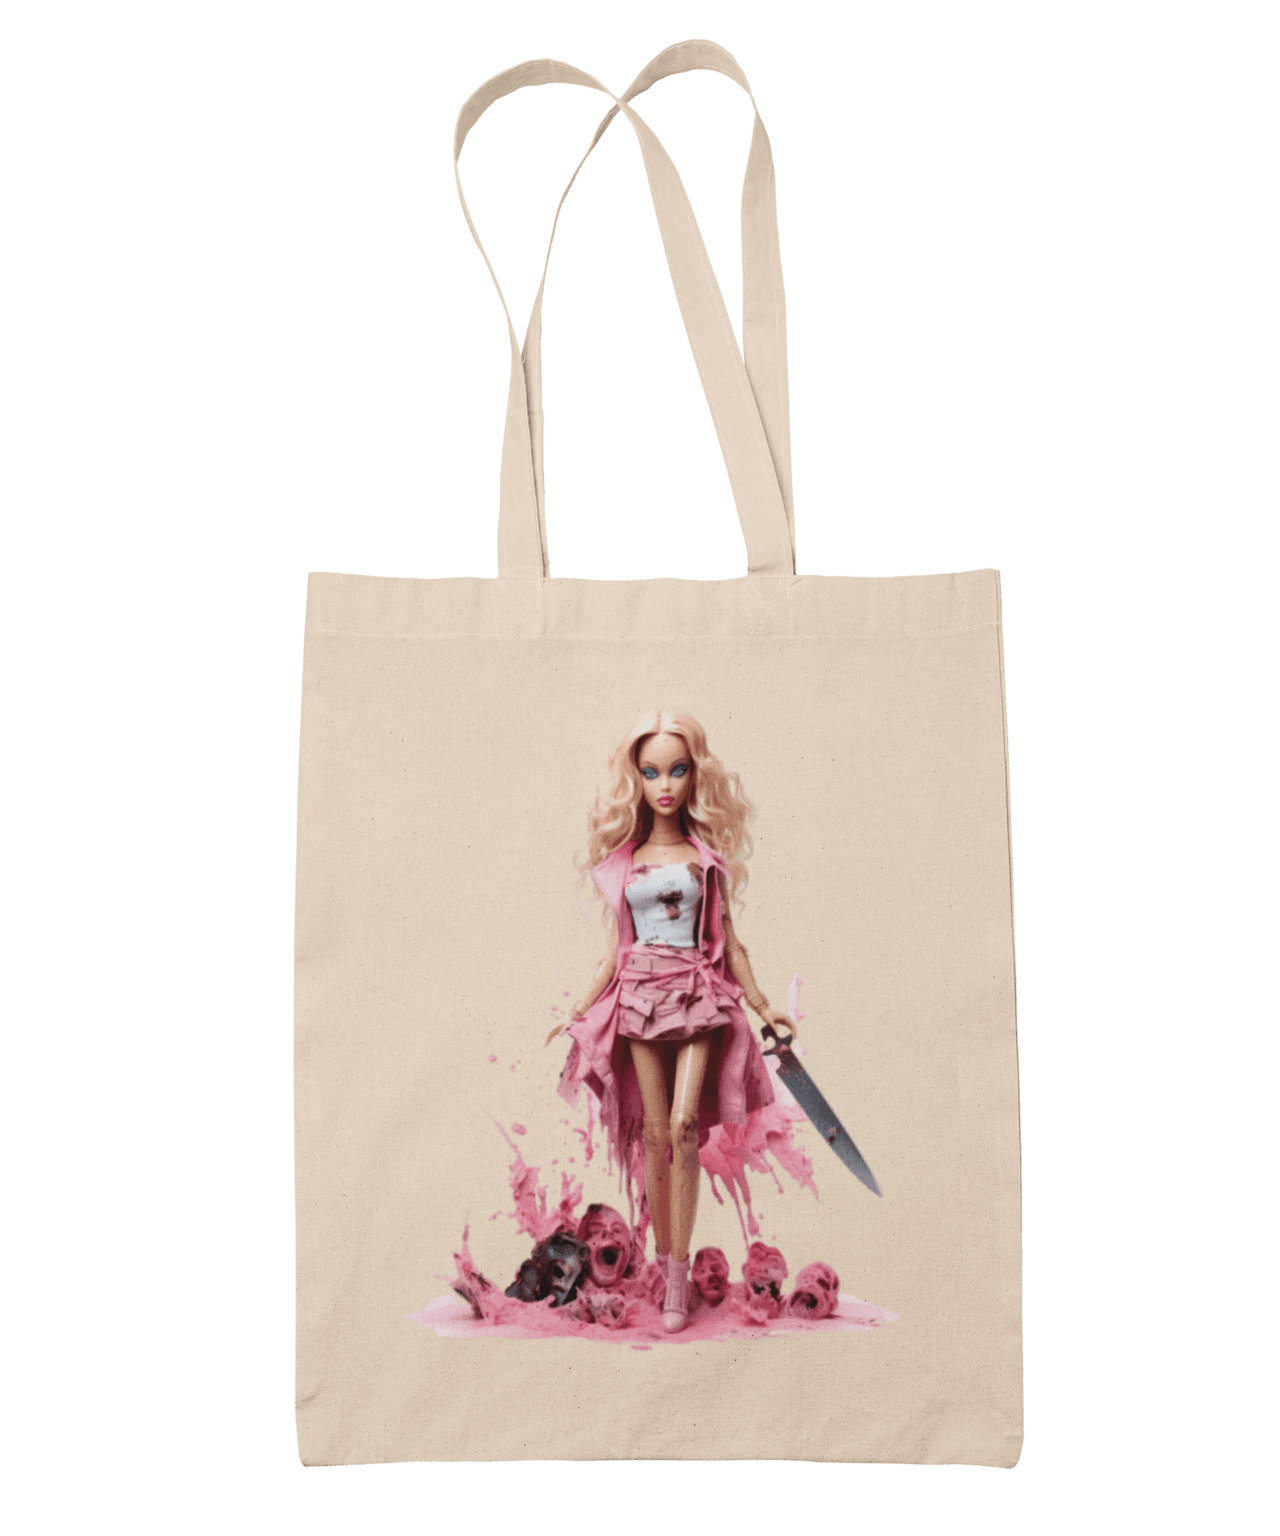 Murdering Gothic Barbie Tote Bag 8Ball